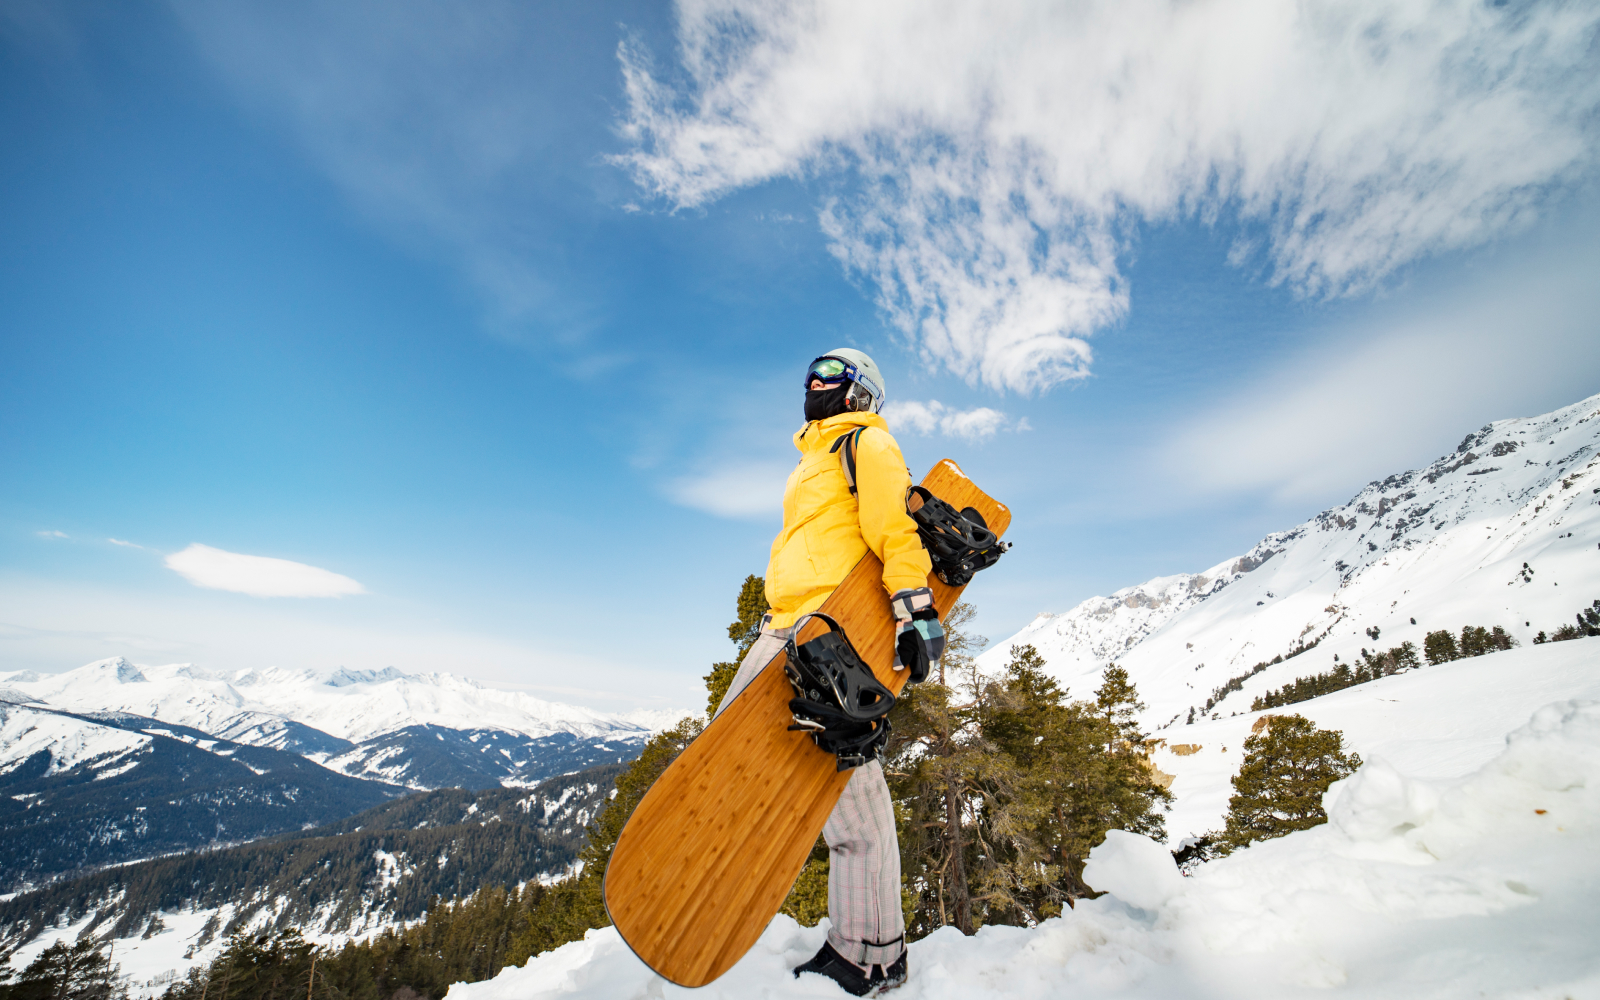 Snowboard LV Ice - Art of Living - Sports and Lifestyle